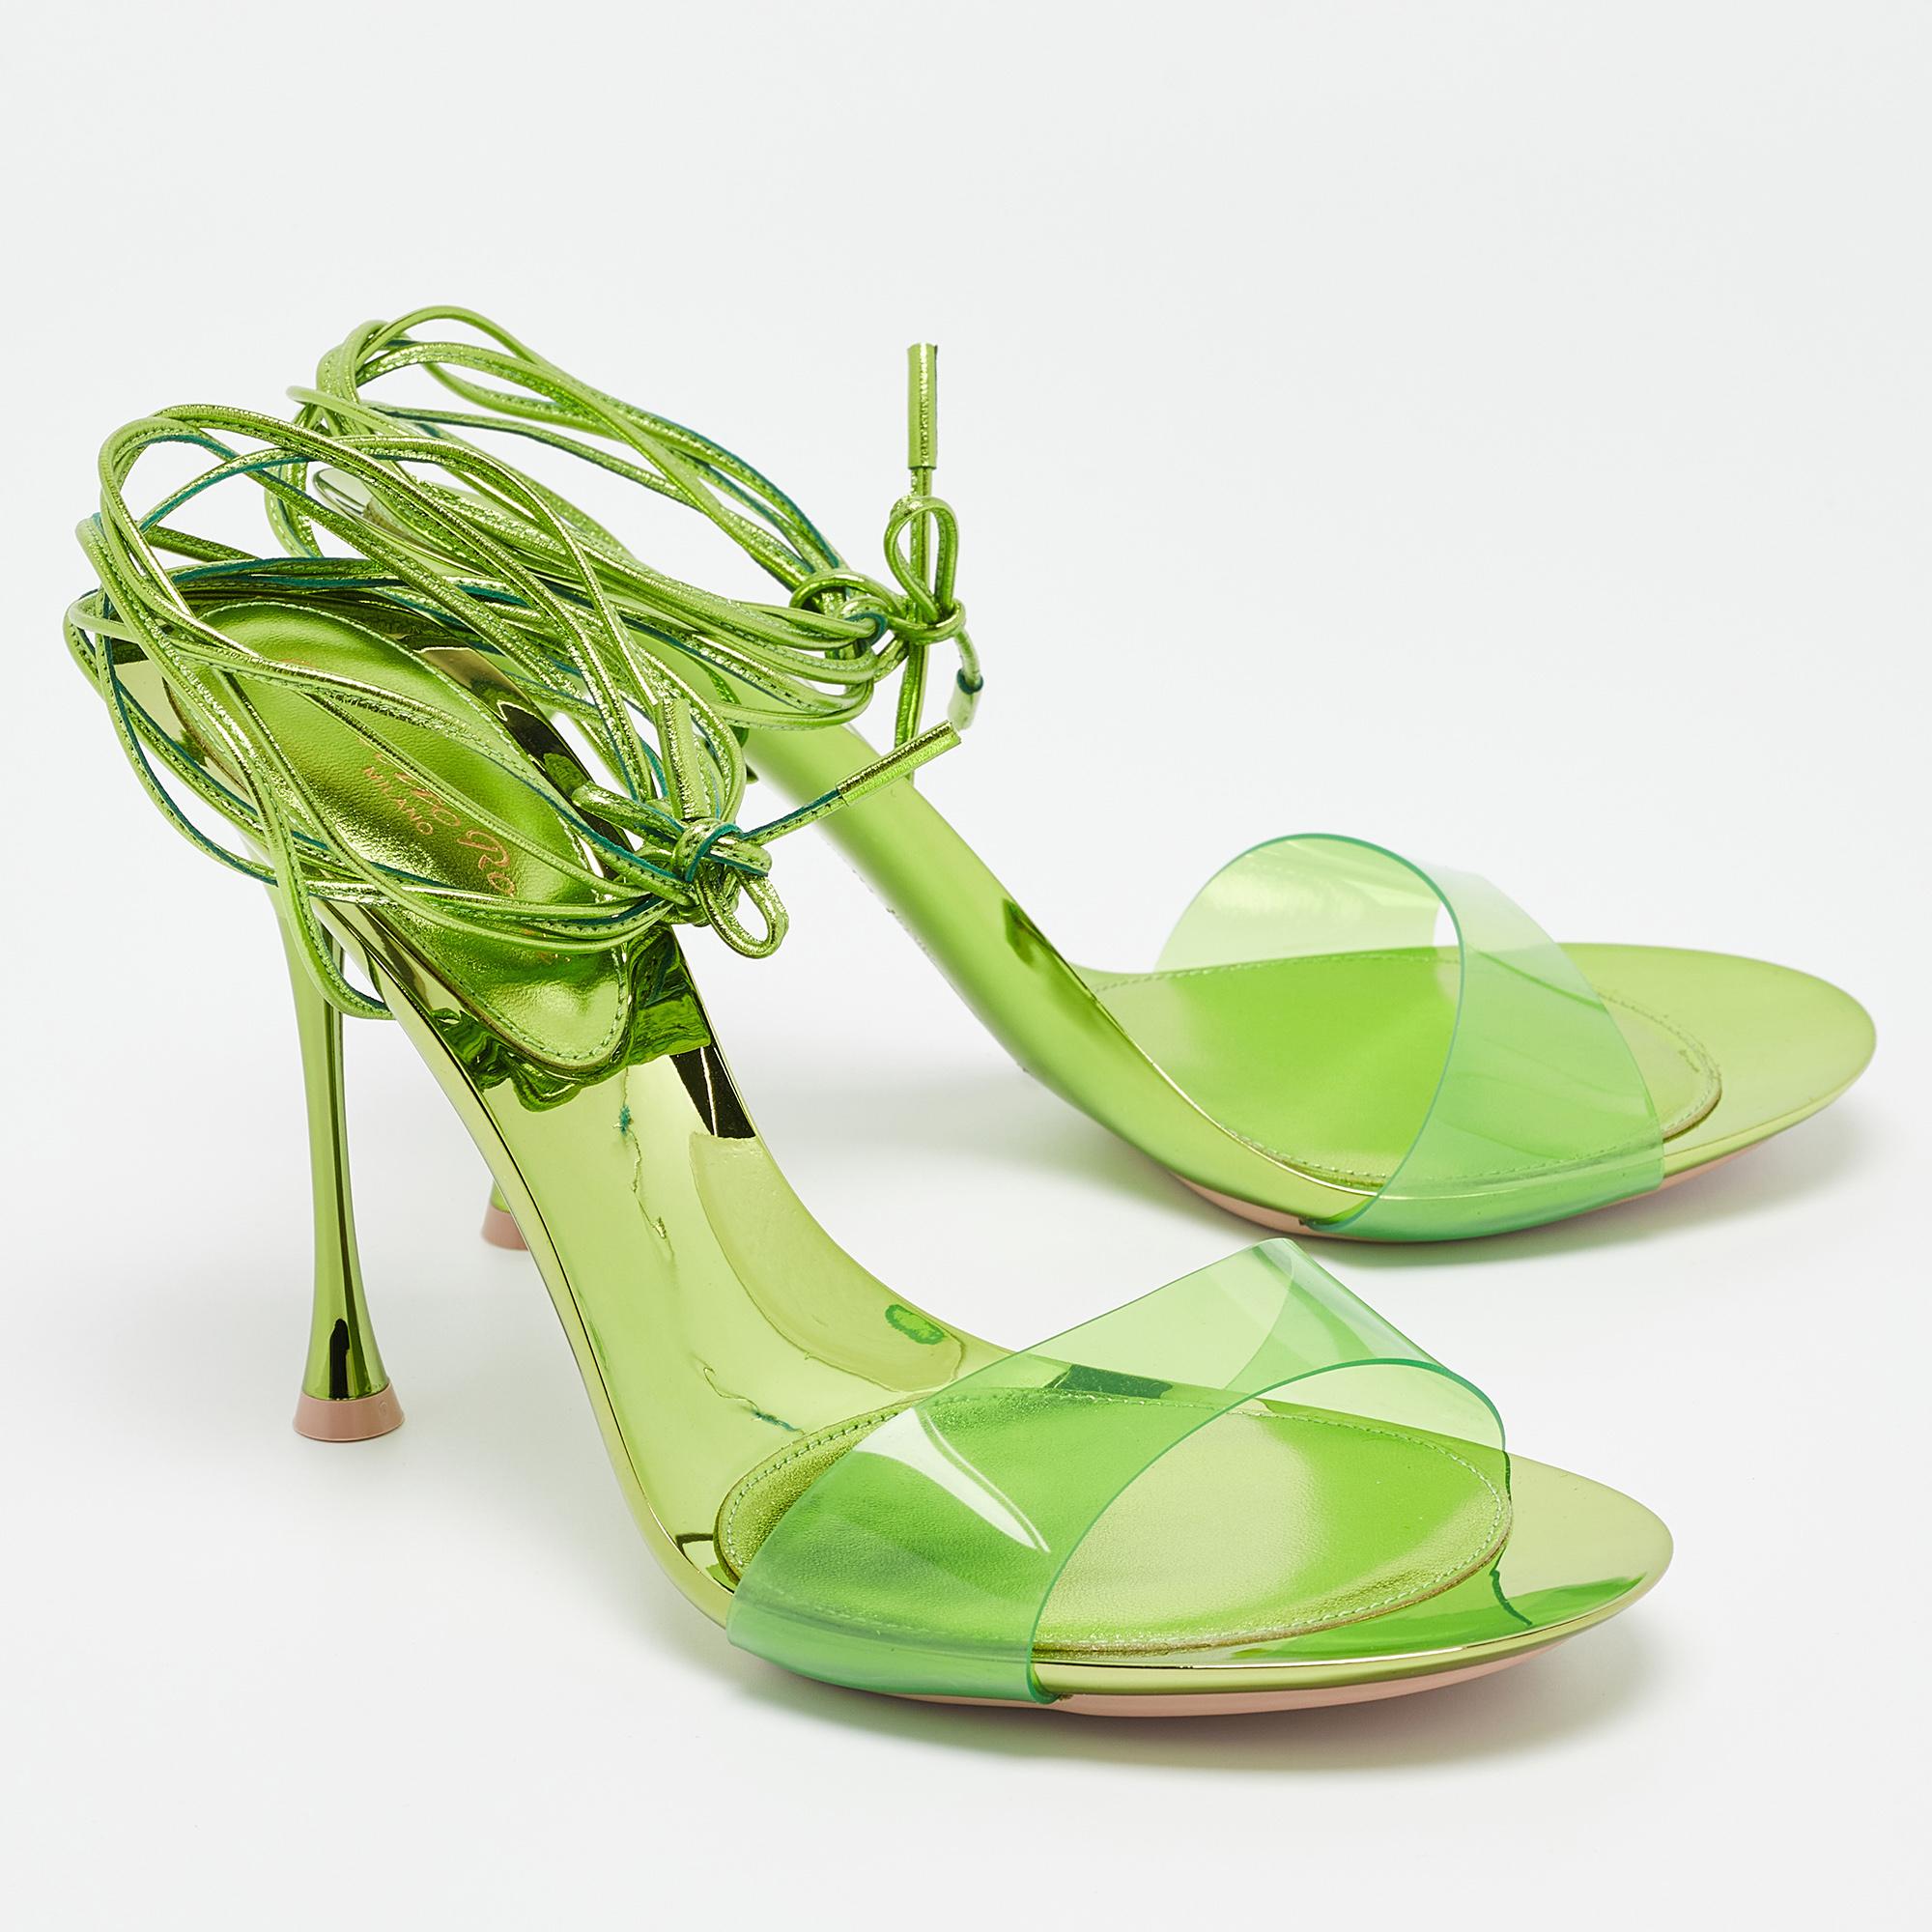 Gianvito Rossi Green PVC and Leather Spice Sandals Size 39.5 For Sale 4